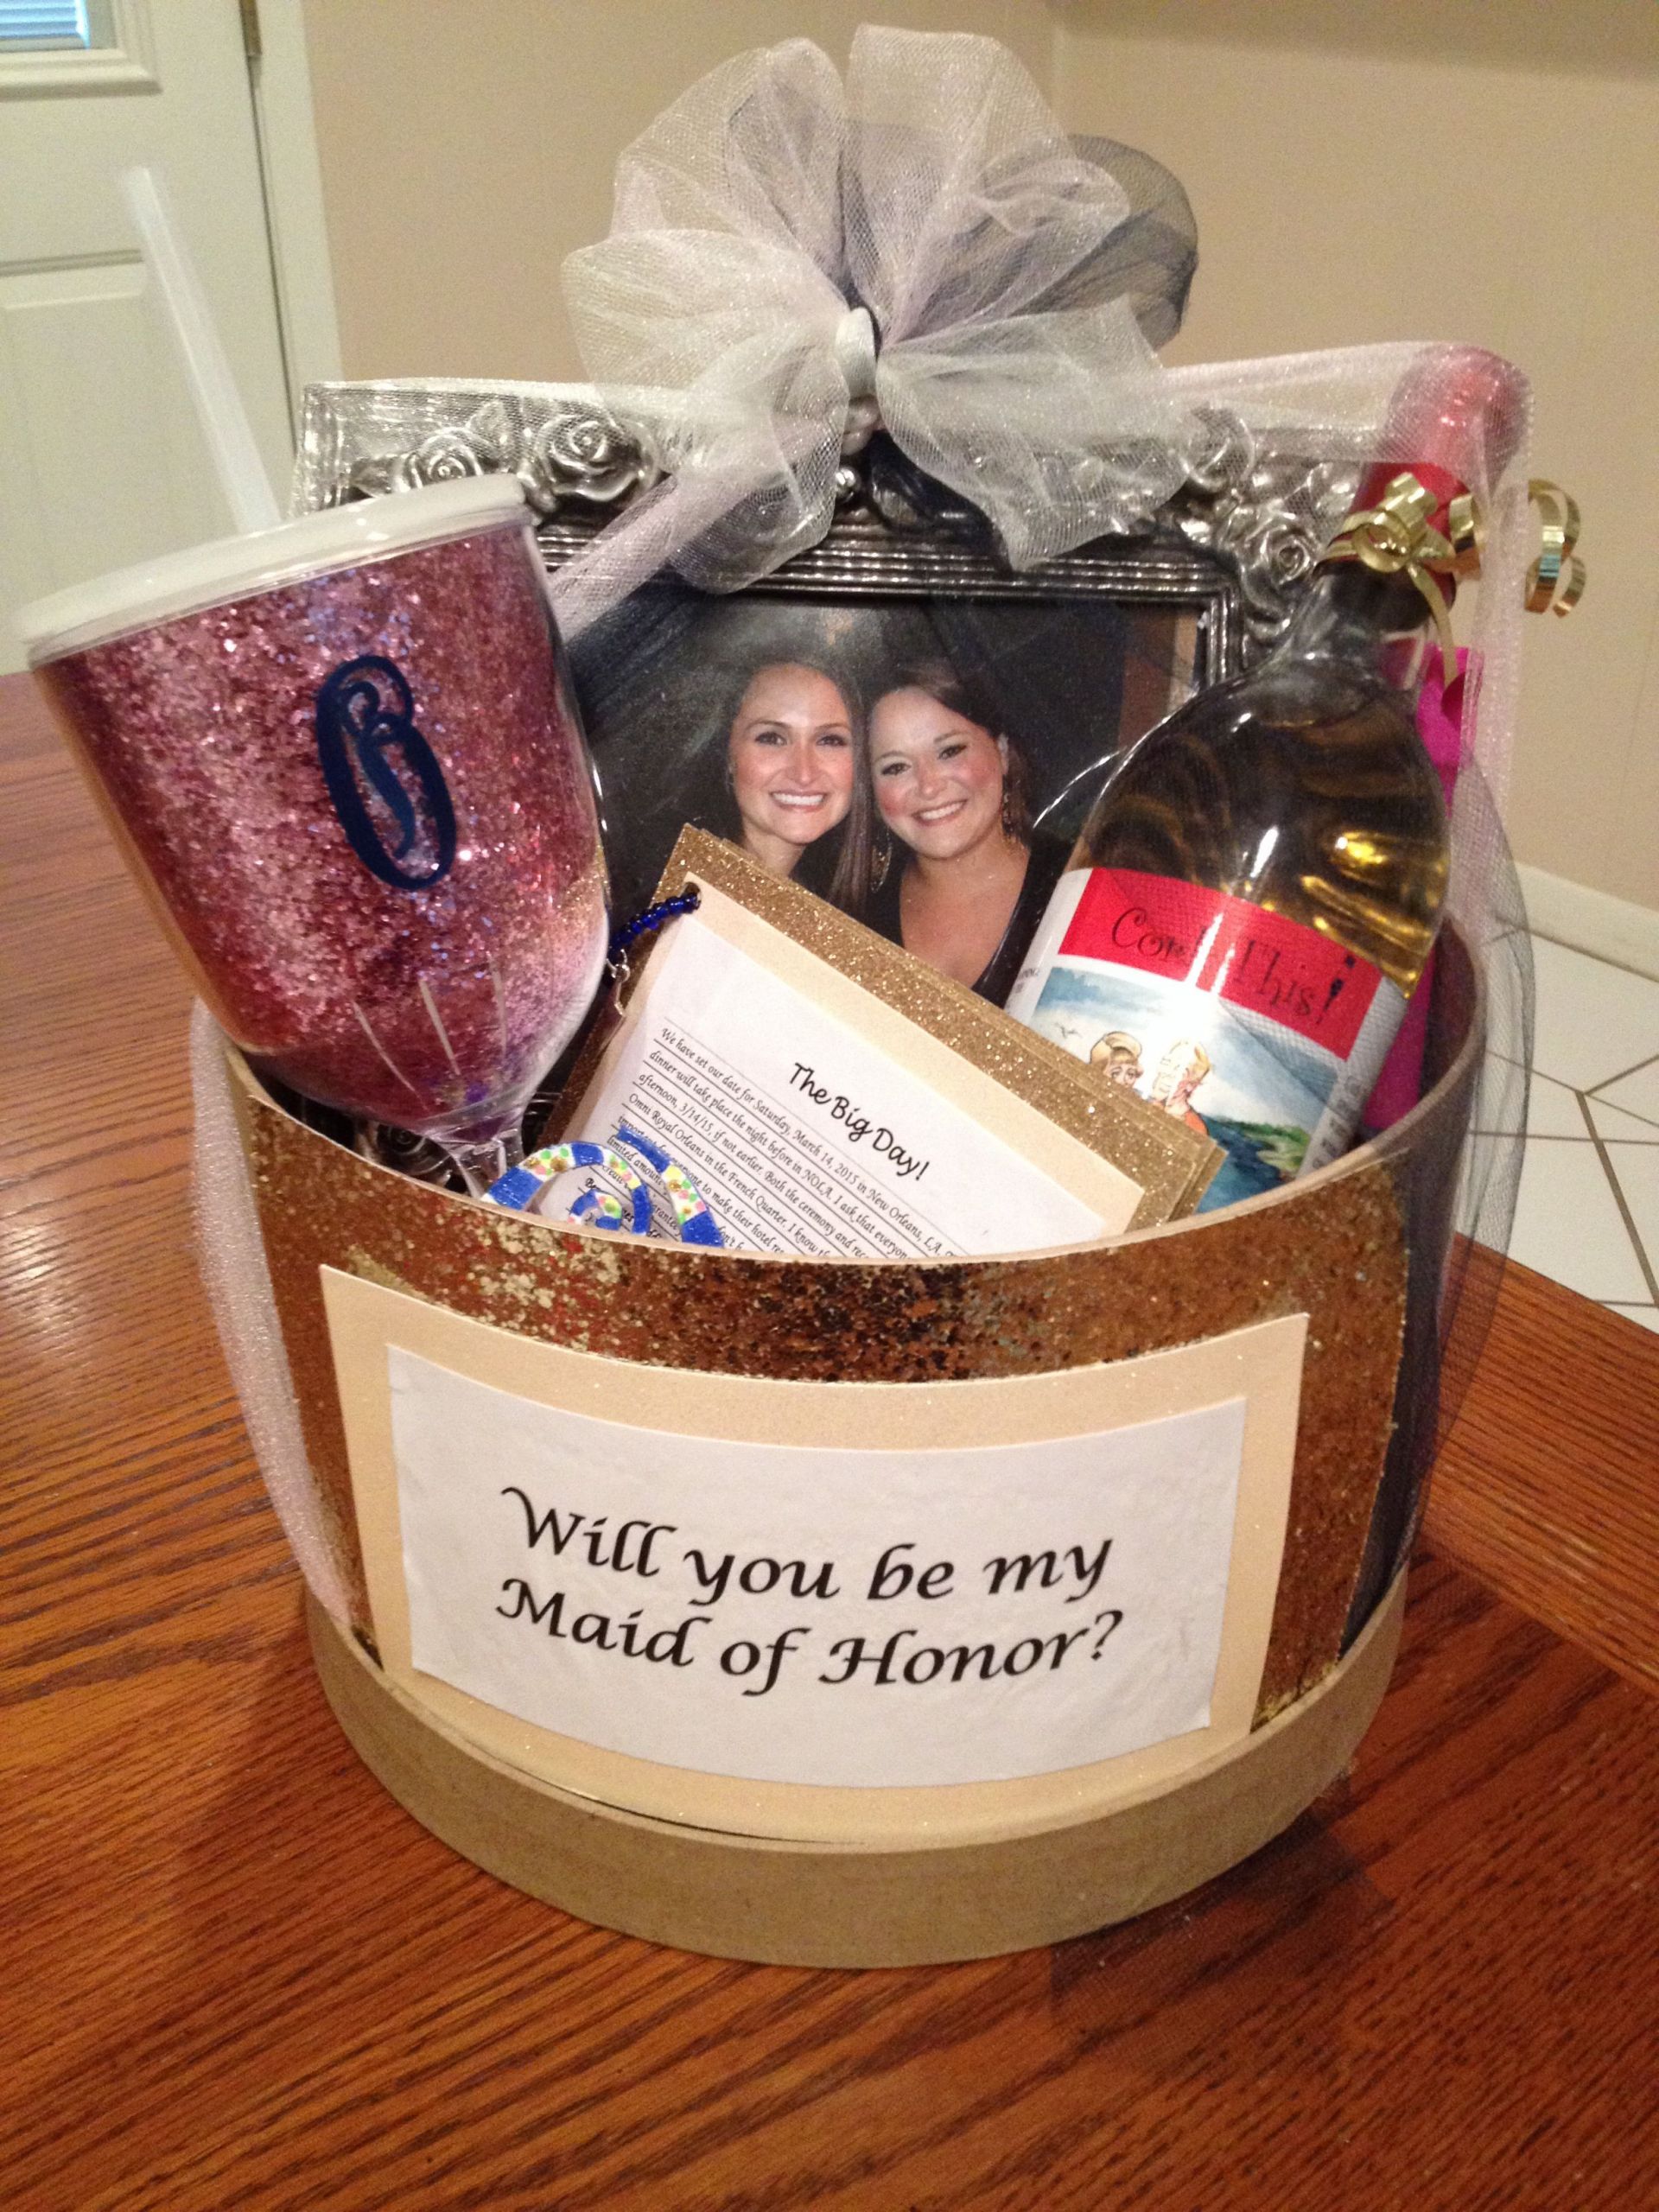 Engagement Party Gift Ideas From Maid Of Honor
 How to ask your bridesmaid or maid of honor